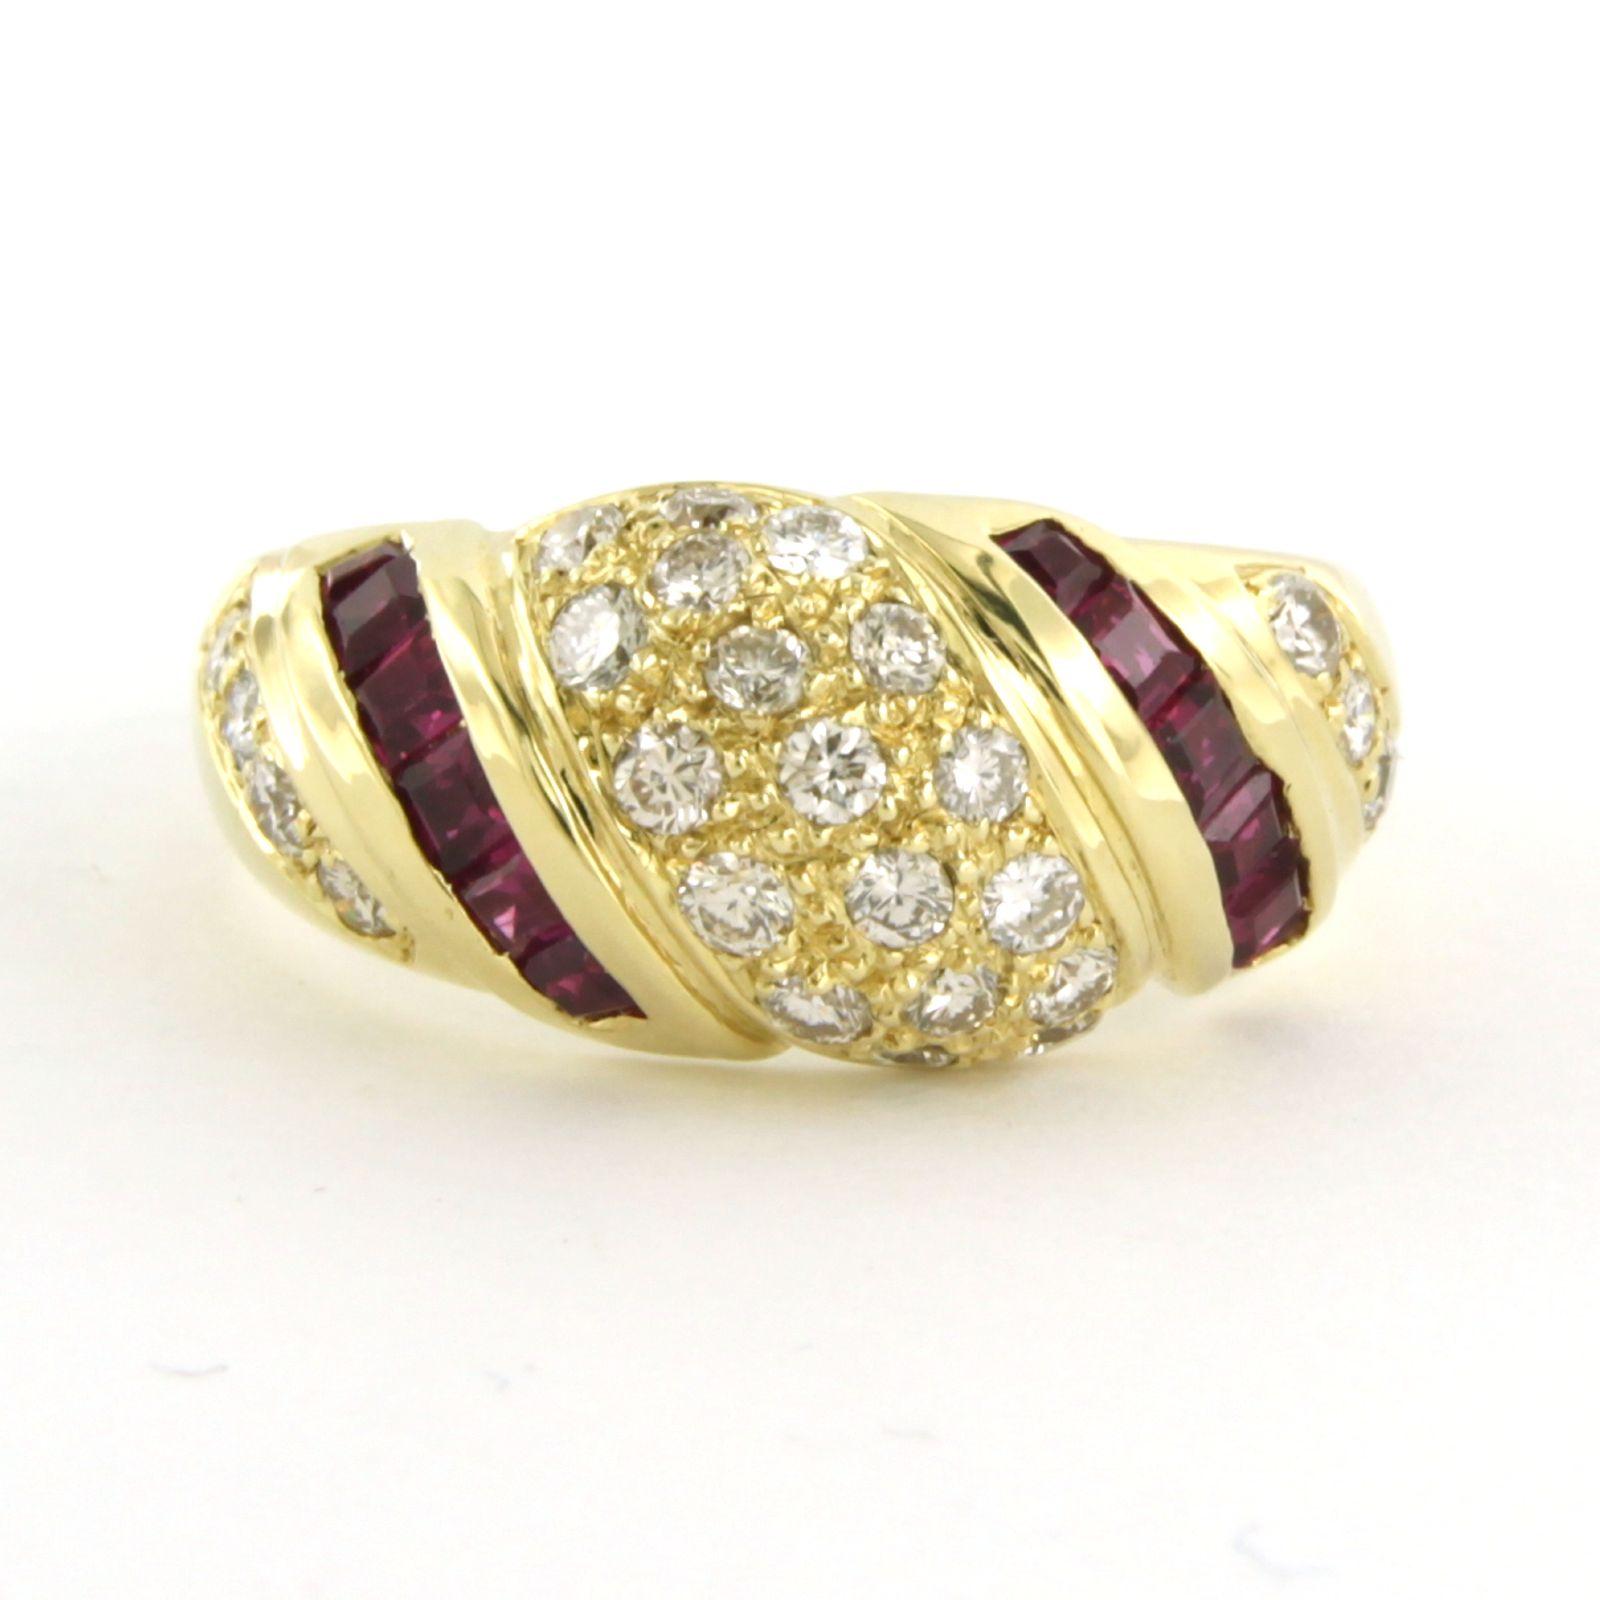 18k yellow gold ring set with ruby ​​and brilliant cut diamond. 0.80ct – G/H – VS/SI – ring size U.S. 6.5 – EU. 17(53)

detailed description:

The top of the ring is 9.9 mm wide by 5.3 mm high

Ring size US 6.5 – EU. 17(53), ring can be enlarged or